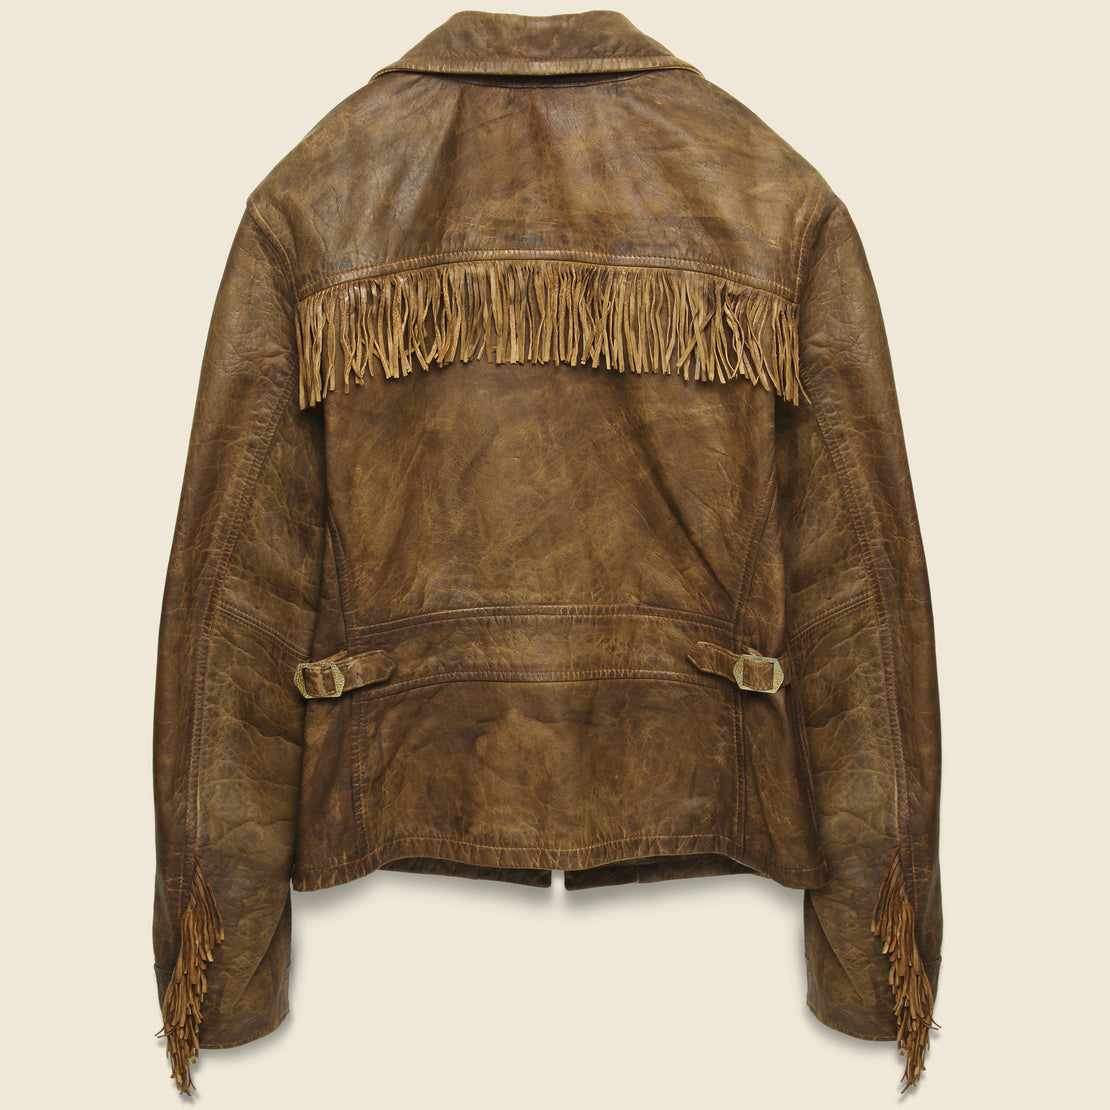 Fringe Leather Cowhide Jacket - Medium Brown - RRL - STAG Provisions - W - Outerwear - Coat/Jacket